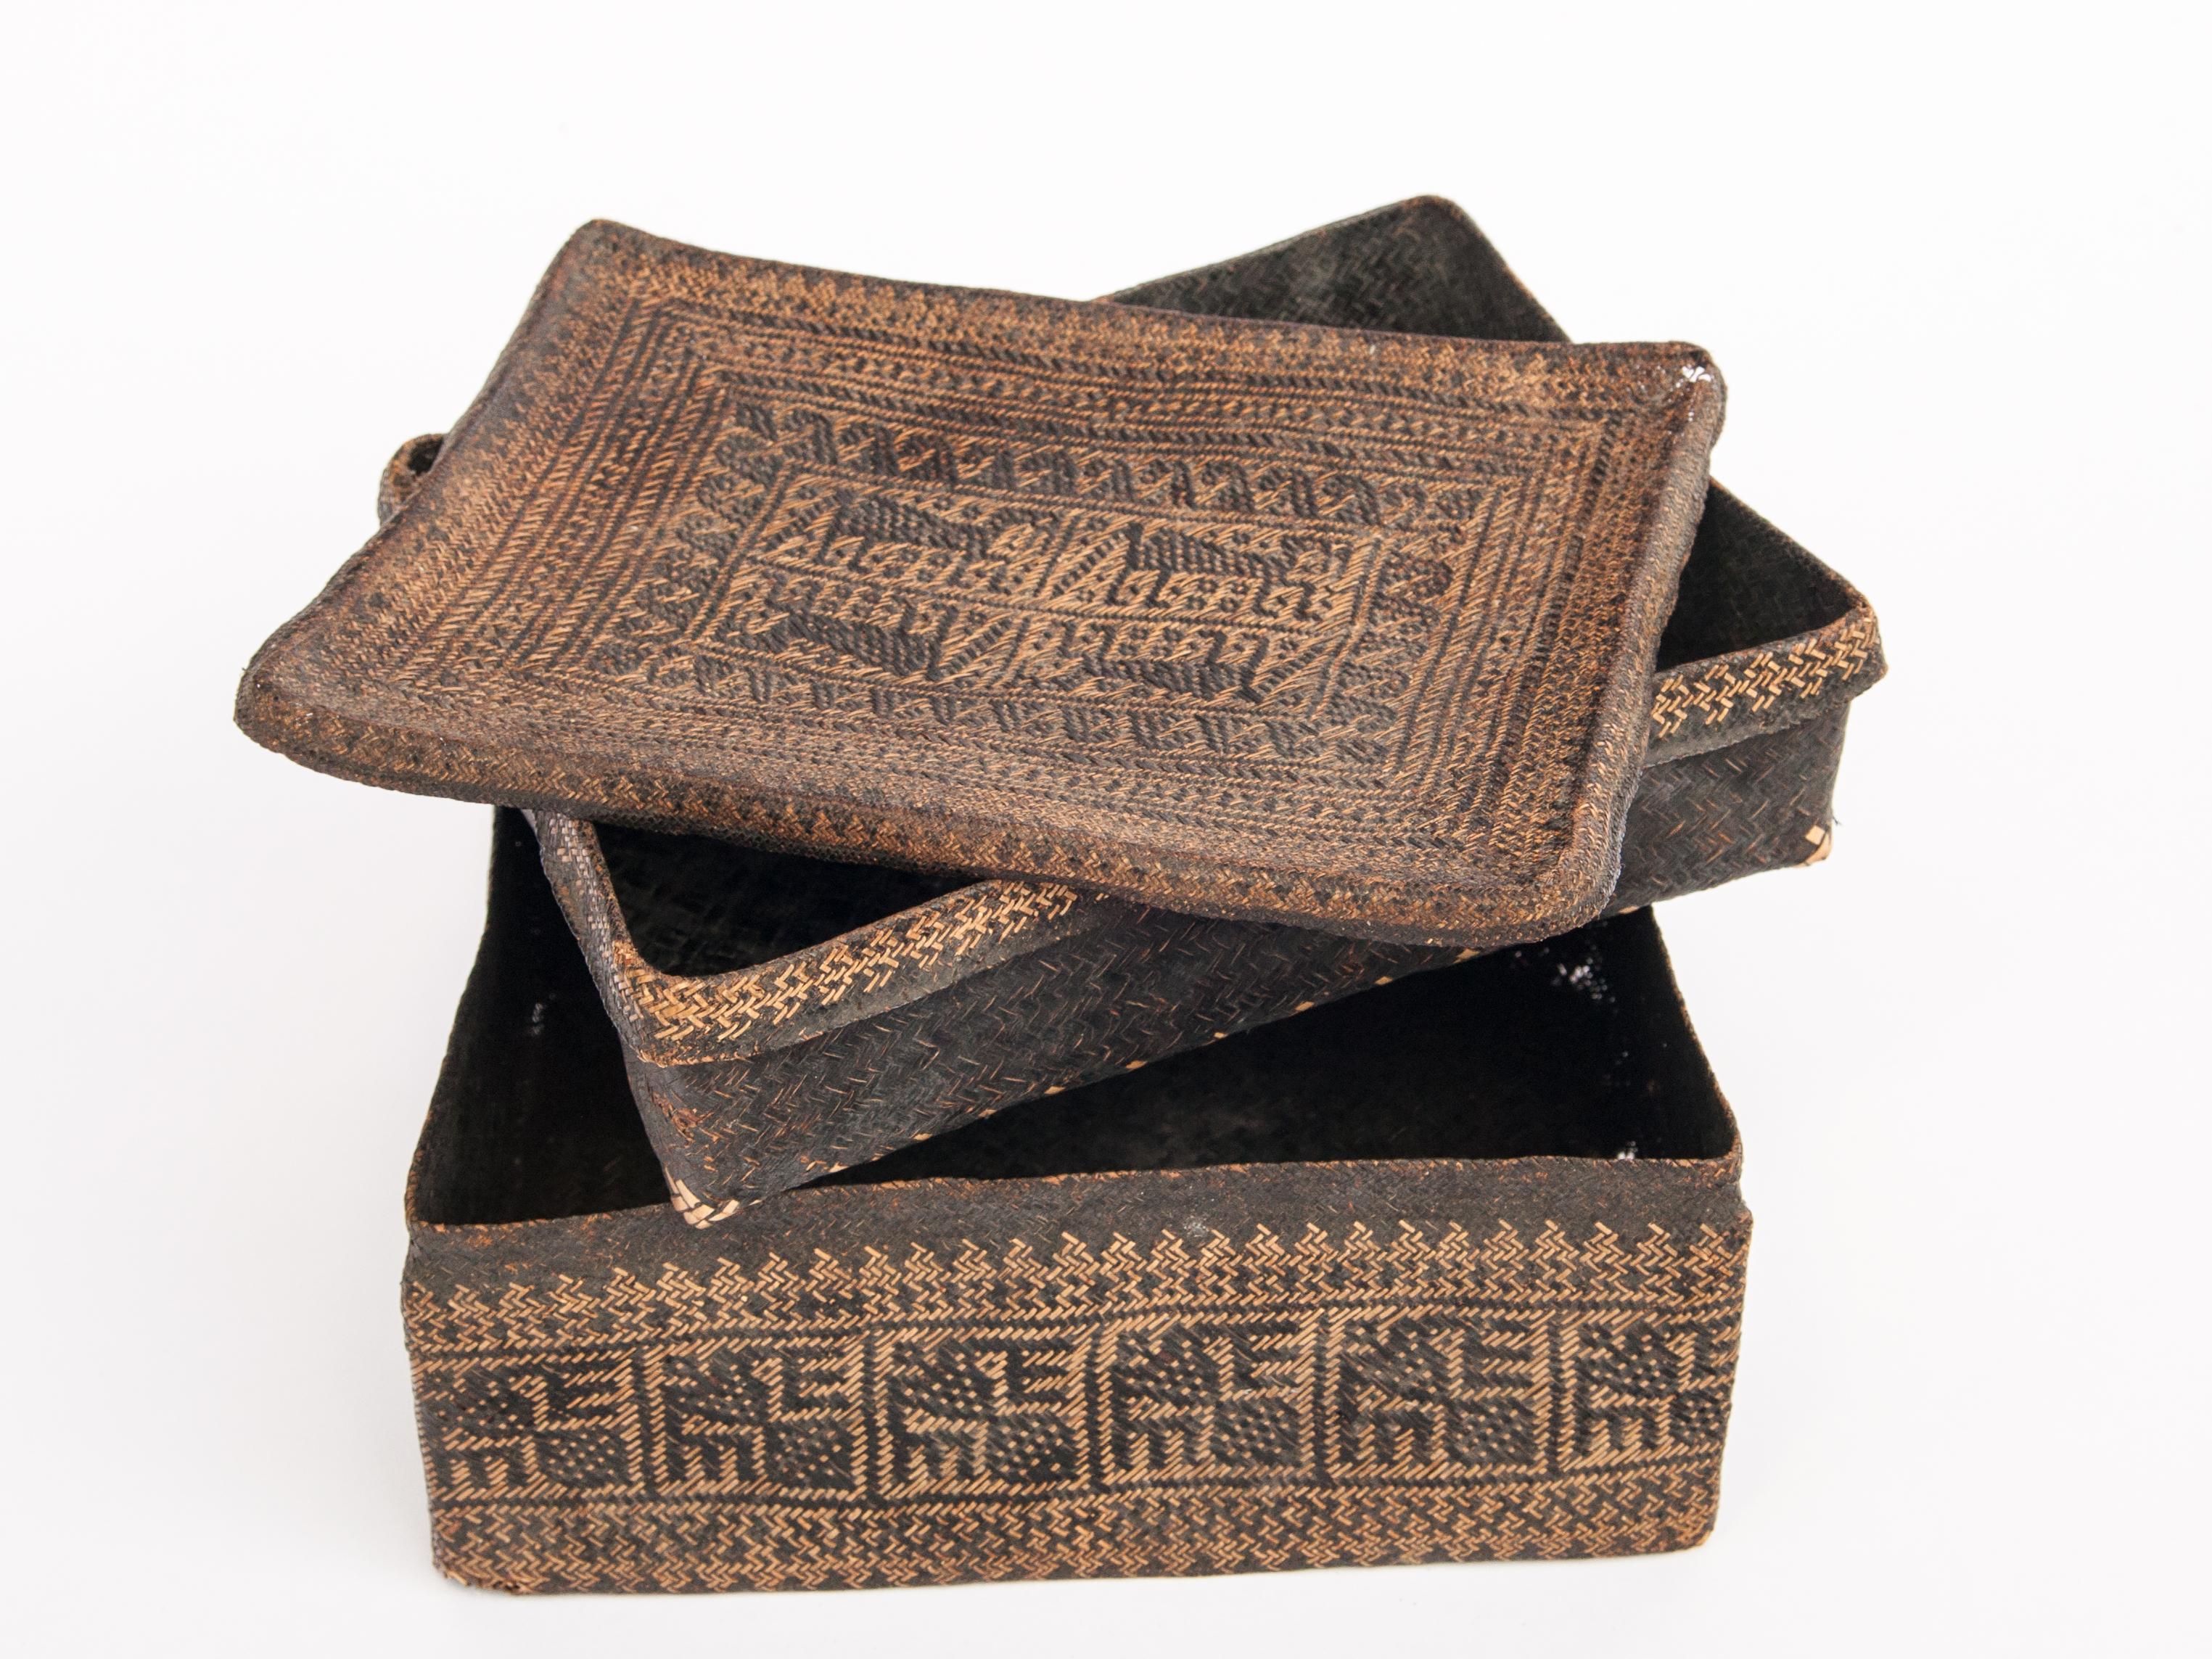 Betel Basket with Woven Design, Lampung, Sumatra Late 19th to Early 20th Century 1